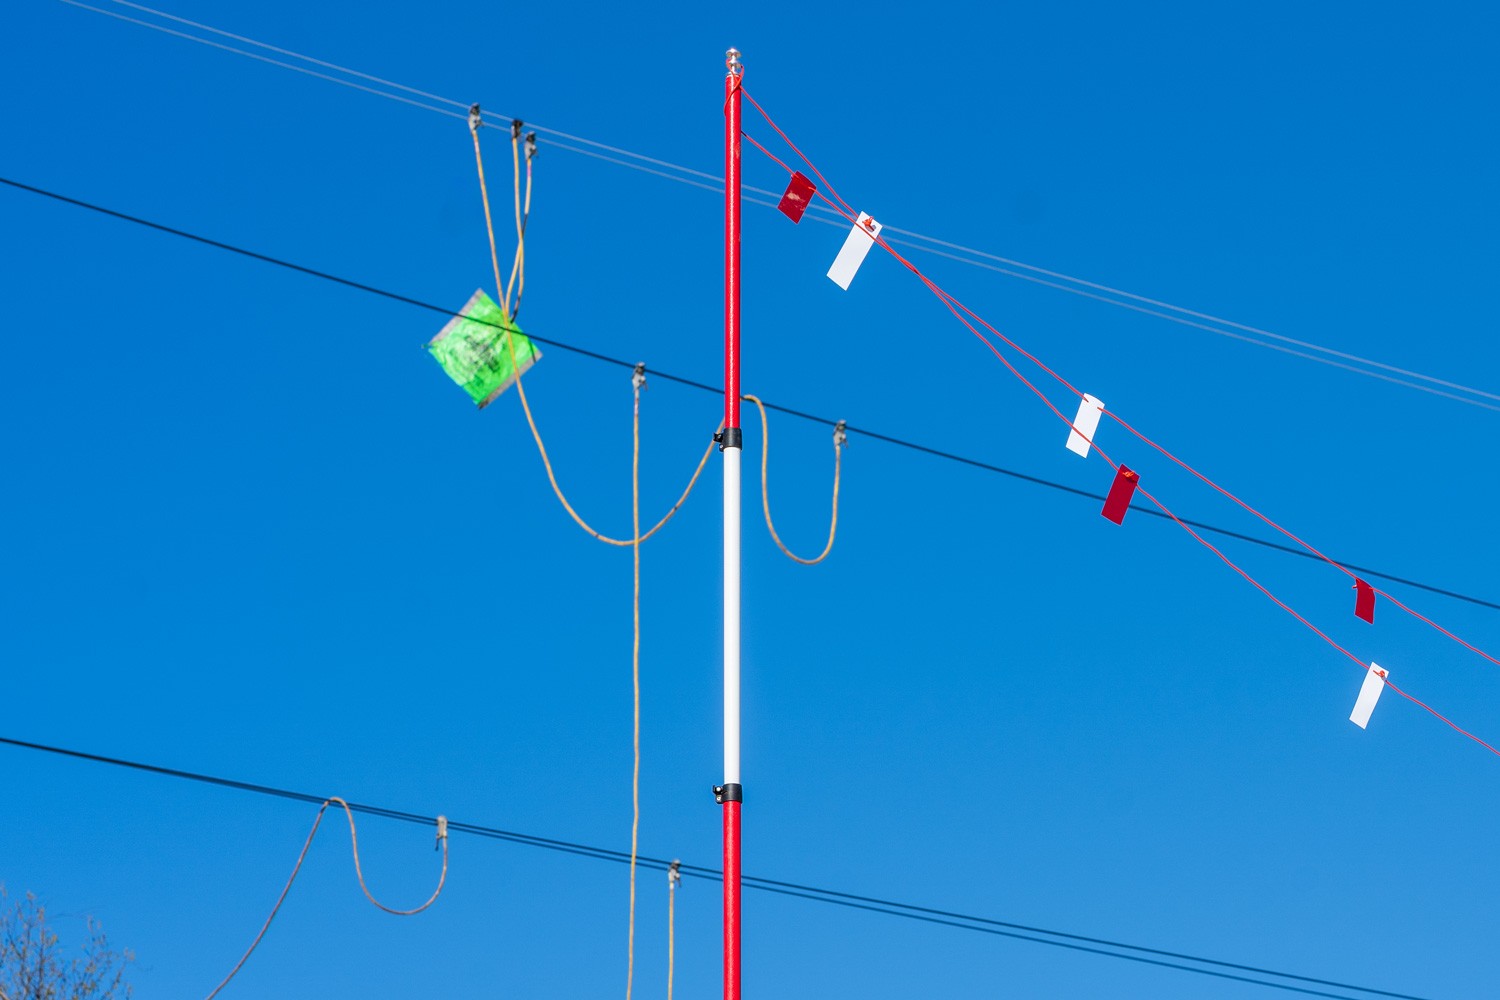 Non-conductive overhead goalposts used before electric powerlines